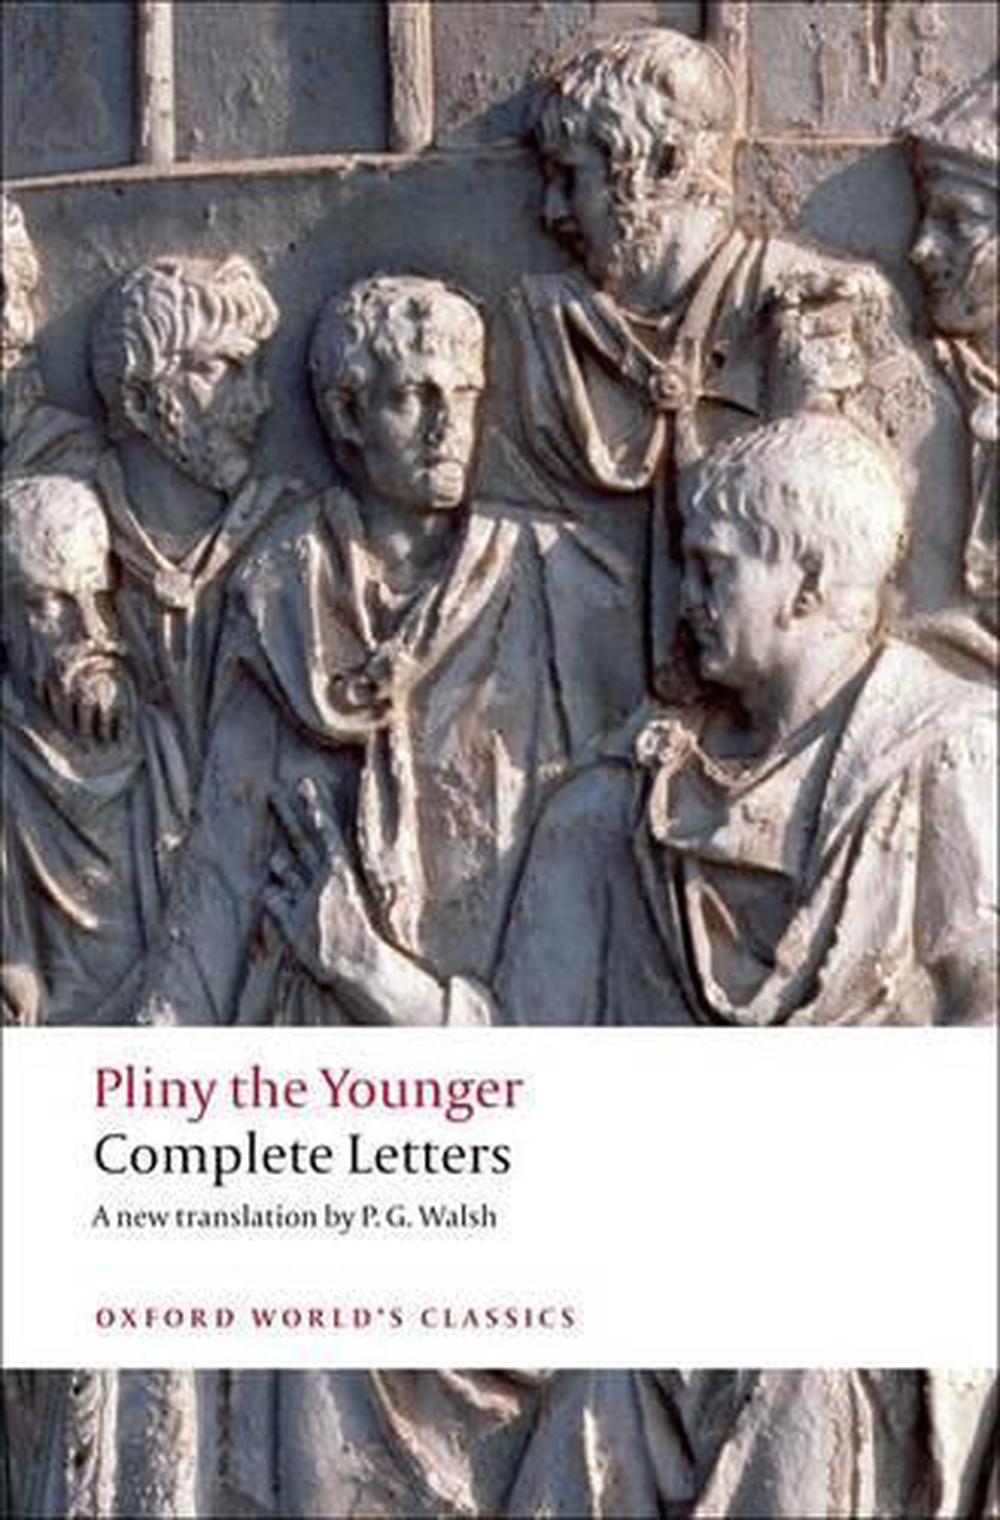 Complete Letters by Pliny The Younger (English) Paperback Book Free